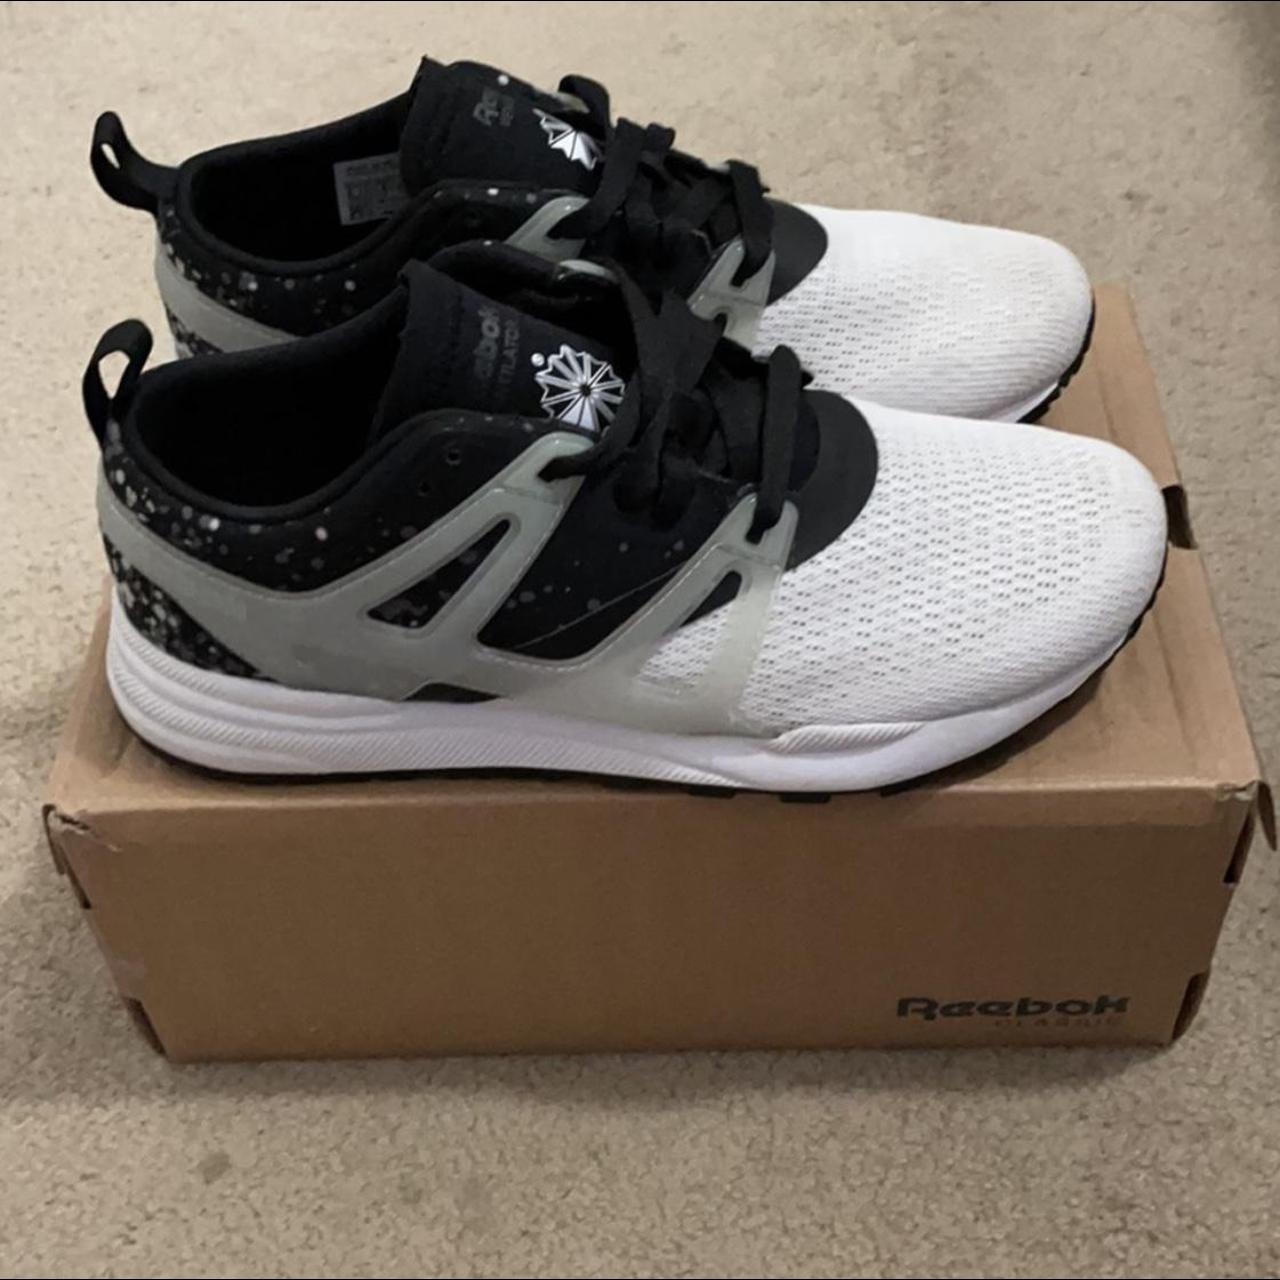 Reebok Women's Black and White Trainers (2)